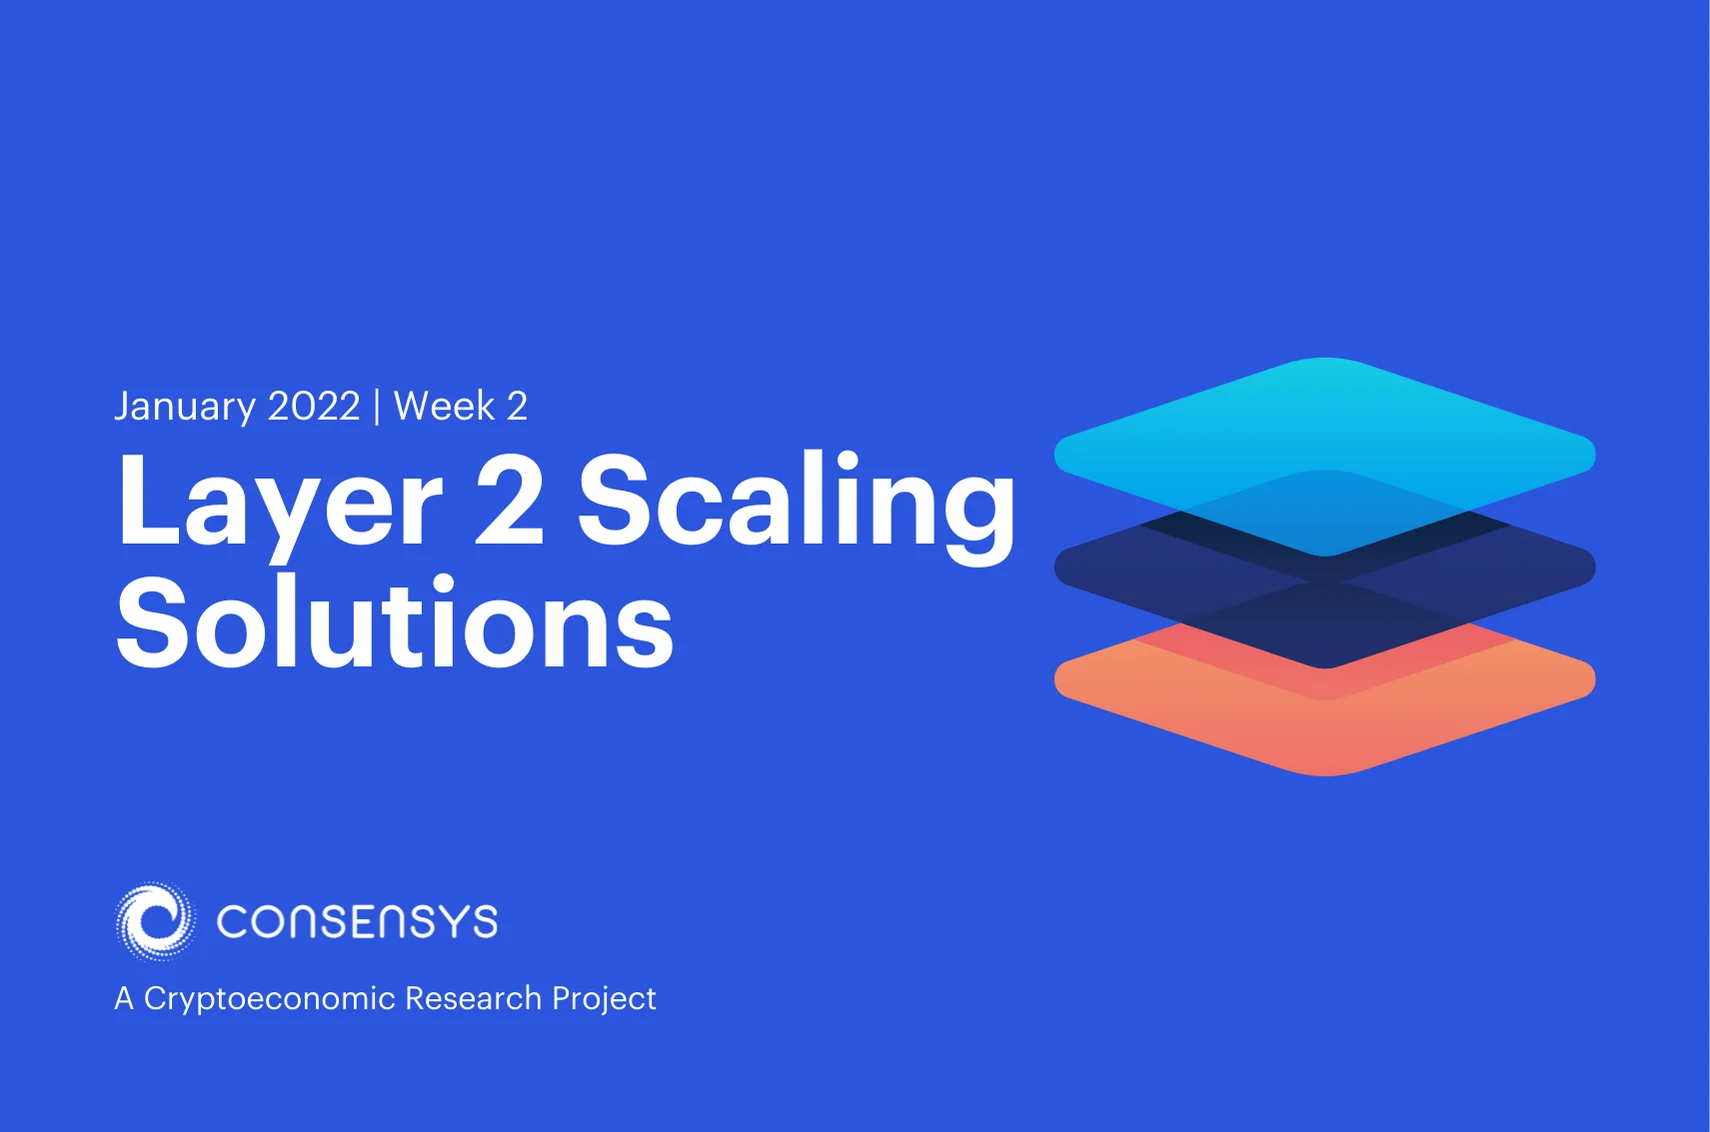 Image: Layer 2 Scaling Solutions | January 2022 | Week 2